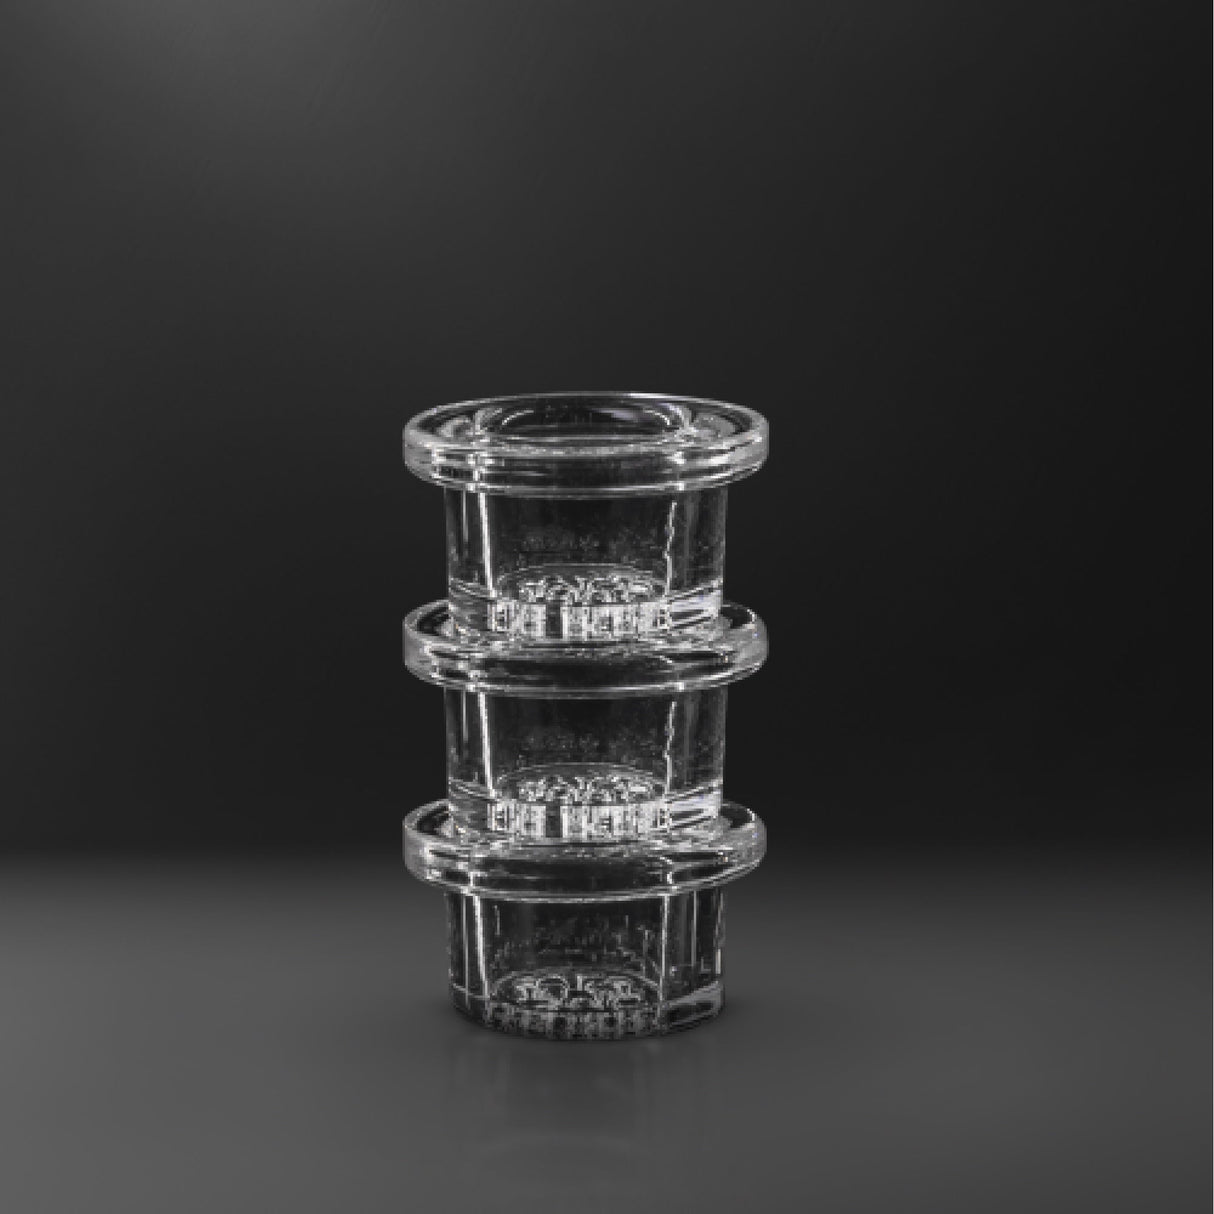 Weedgets Maze-X Pipe Replacement Borosilicate Glass Bowl on Dark Background